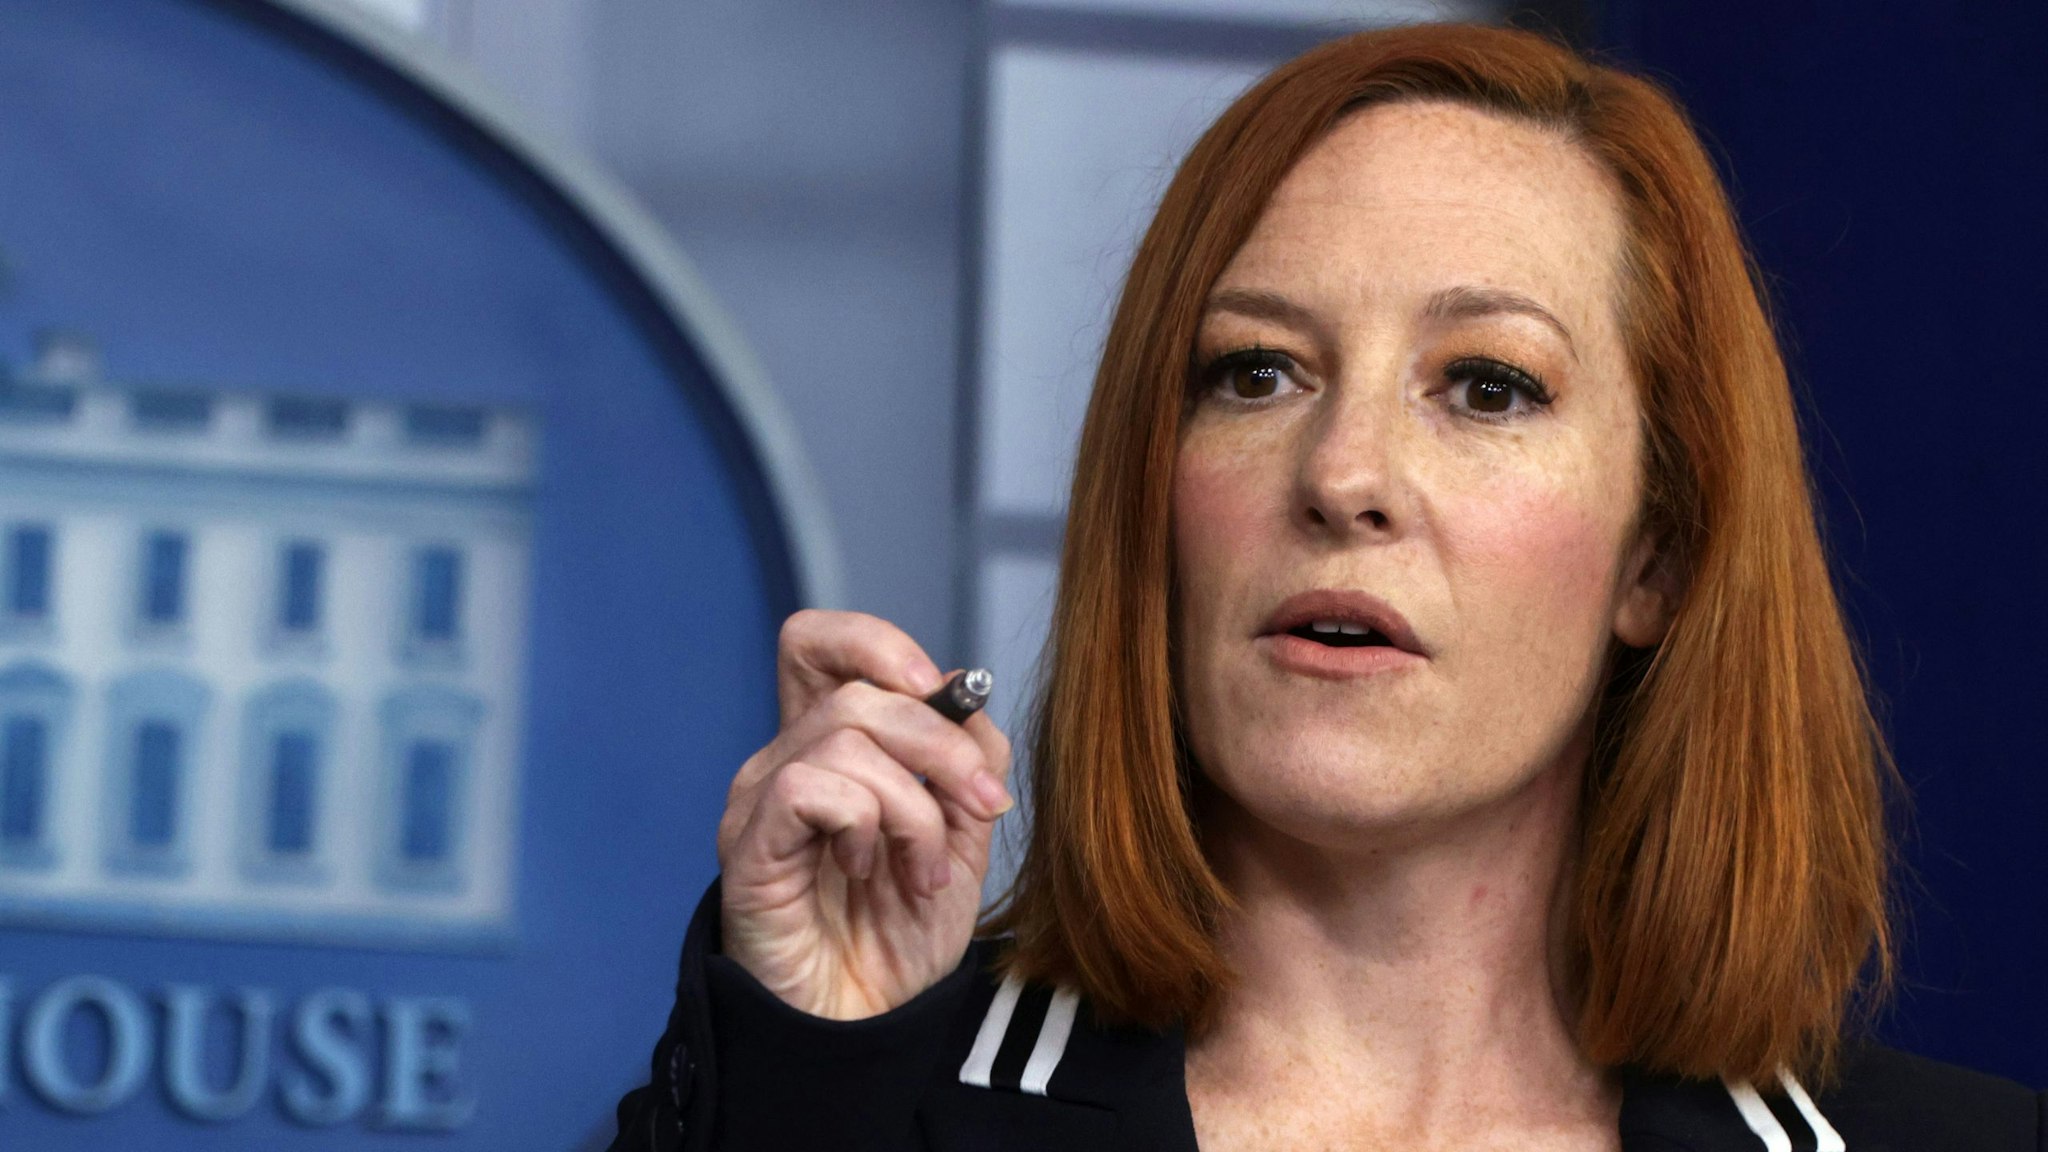 WASHINGTON, DC - APRIL 21: White House Press Secretary Jen Psaki speaks during a daily press briefing at the James Brady Press Briefing Room of the White House on April 21, 2021 in Washington, DC. Psaki held the daily briefing to answer questions from members of the press.